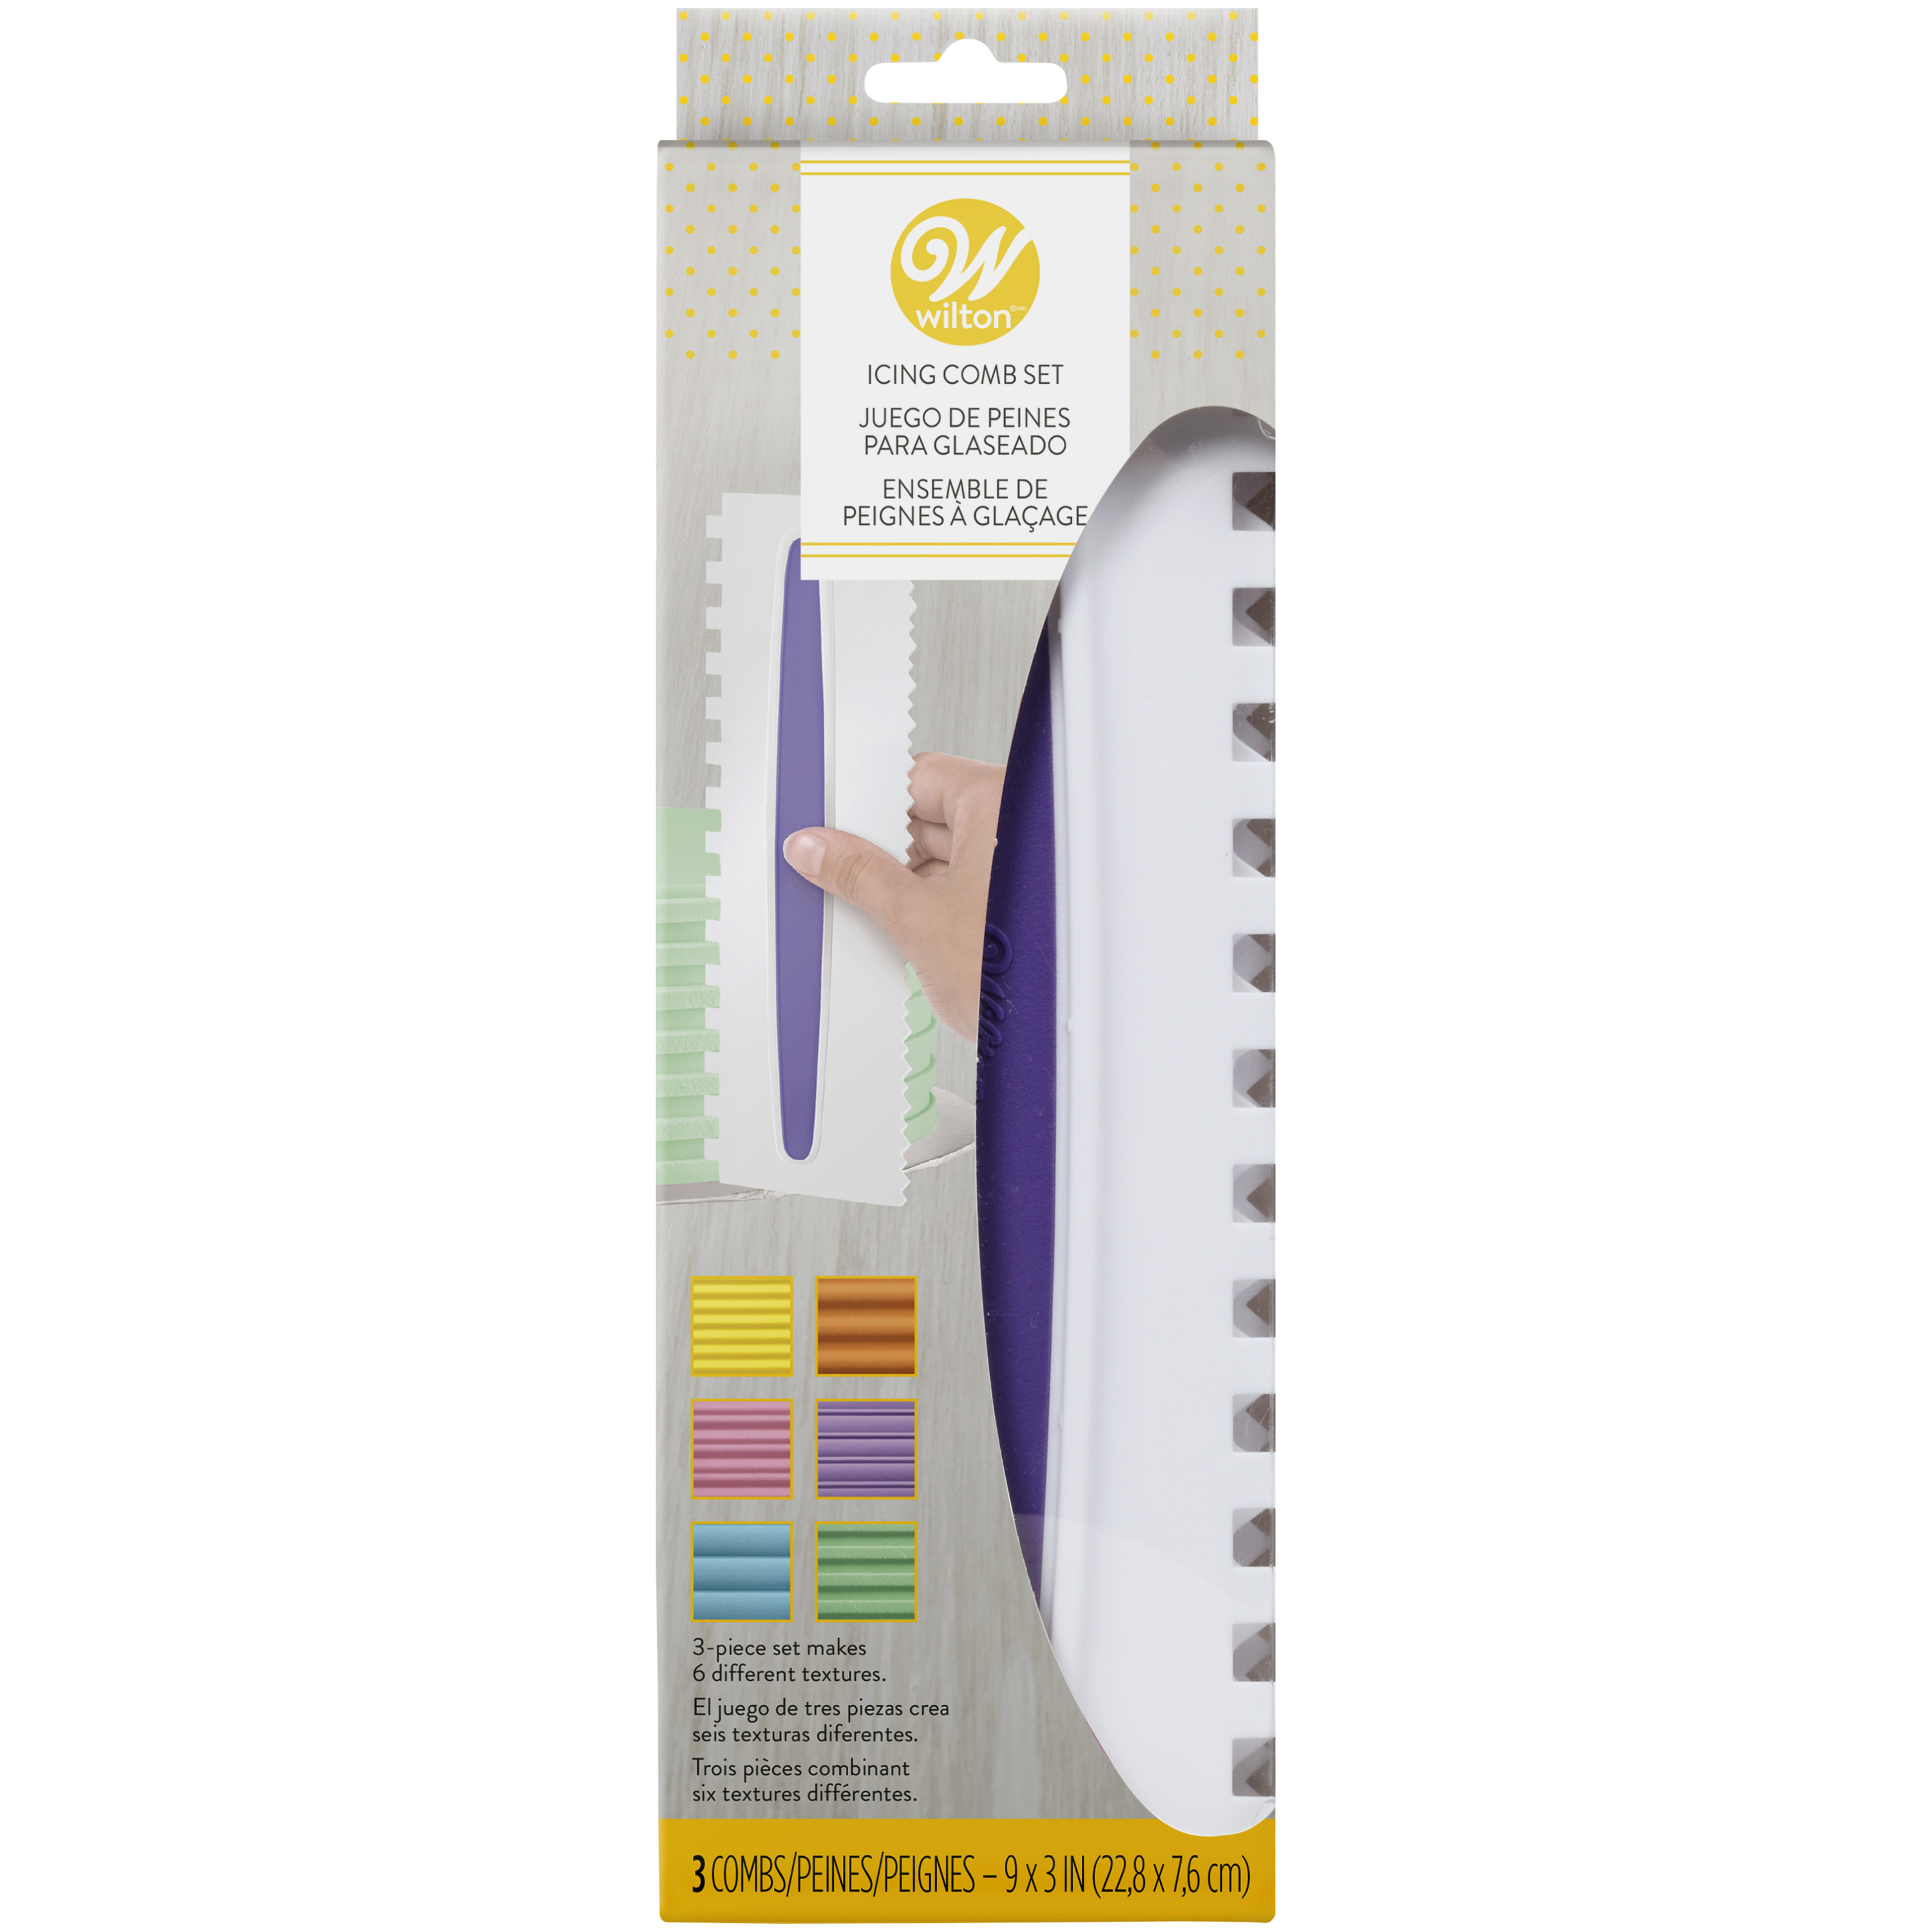 Wilton Icing Smoother Comb Set, 3-Piece Adaptable Model - image 1 of 16